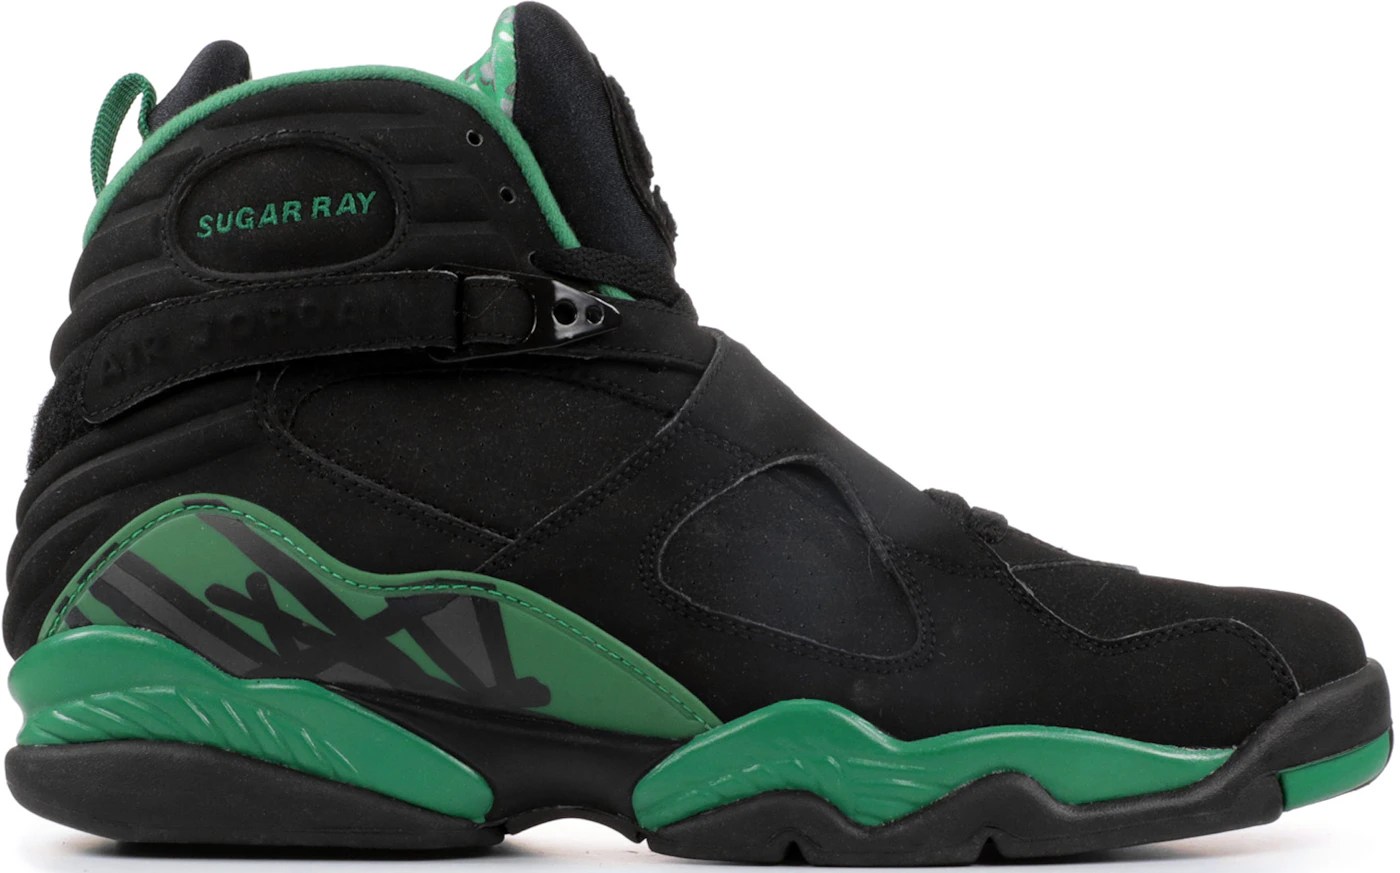 There's Another Ray Allen Air Jordan 13